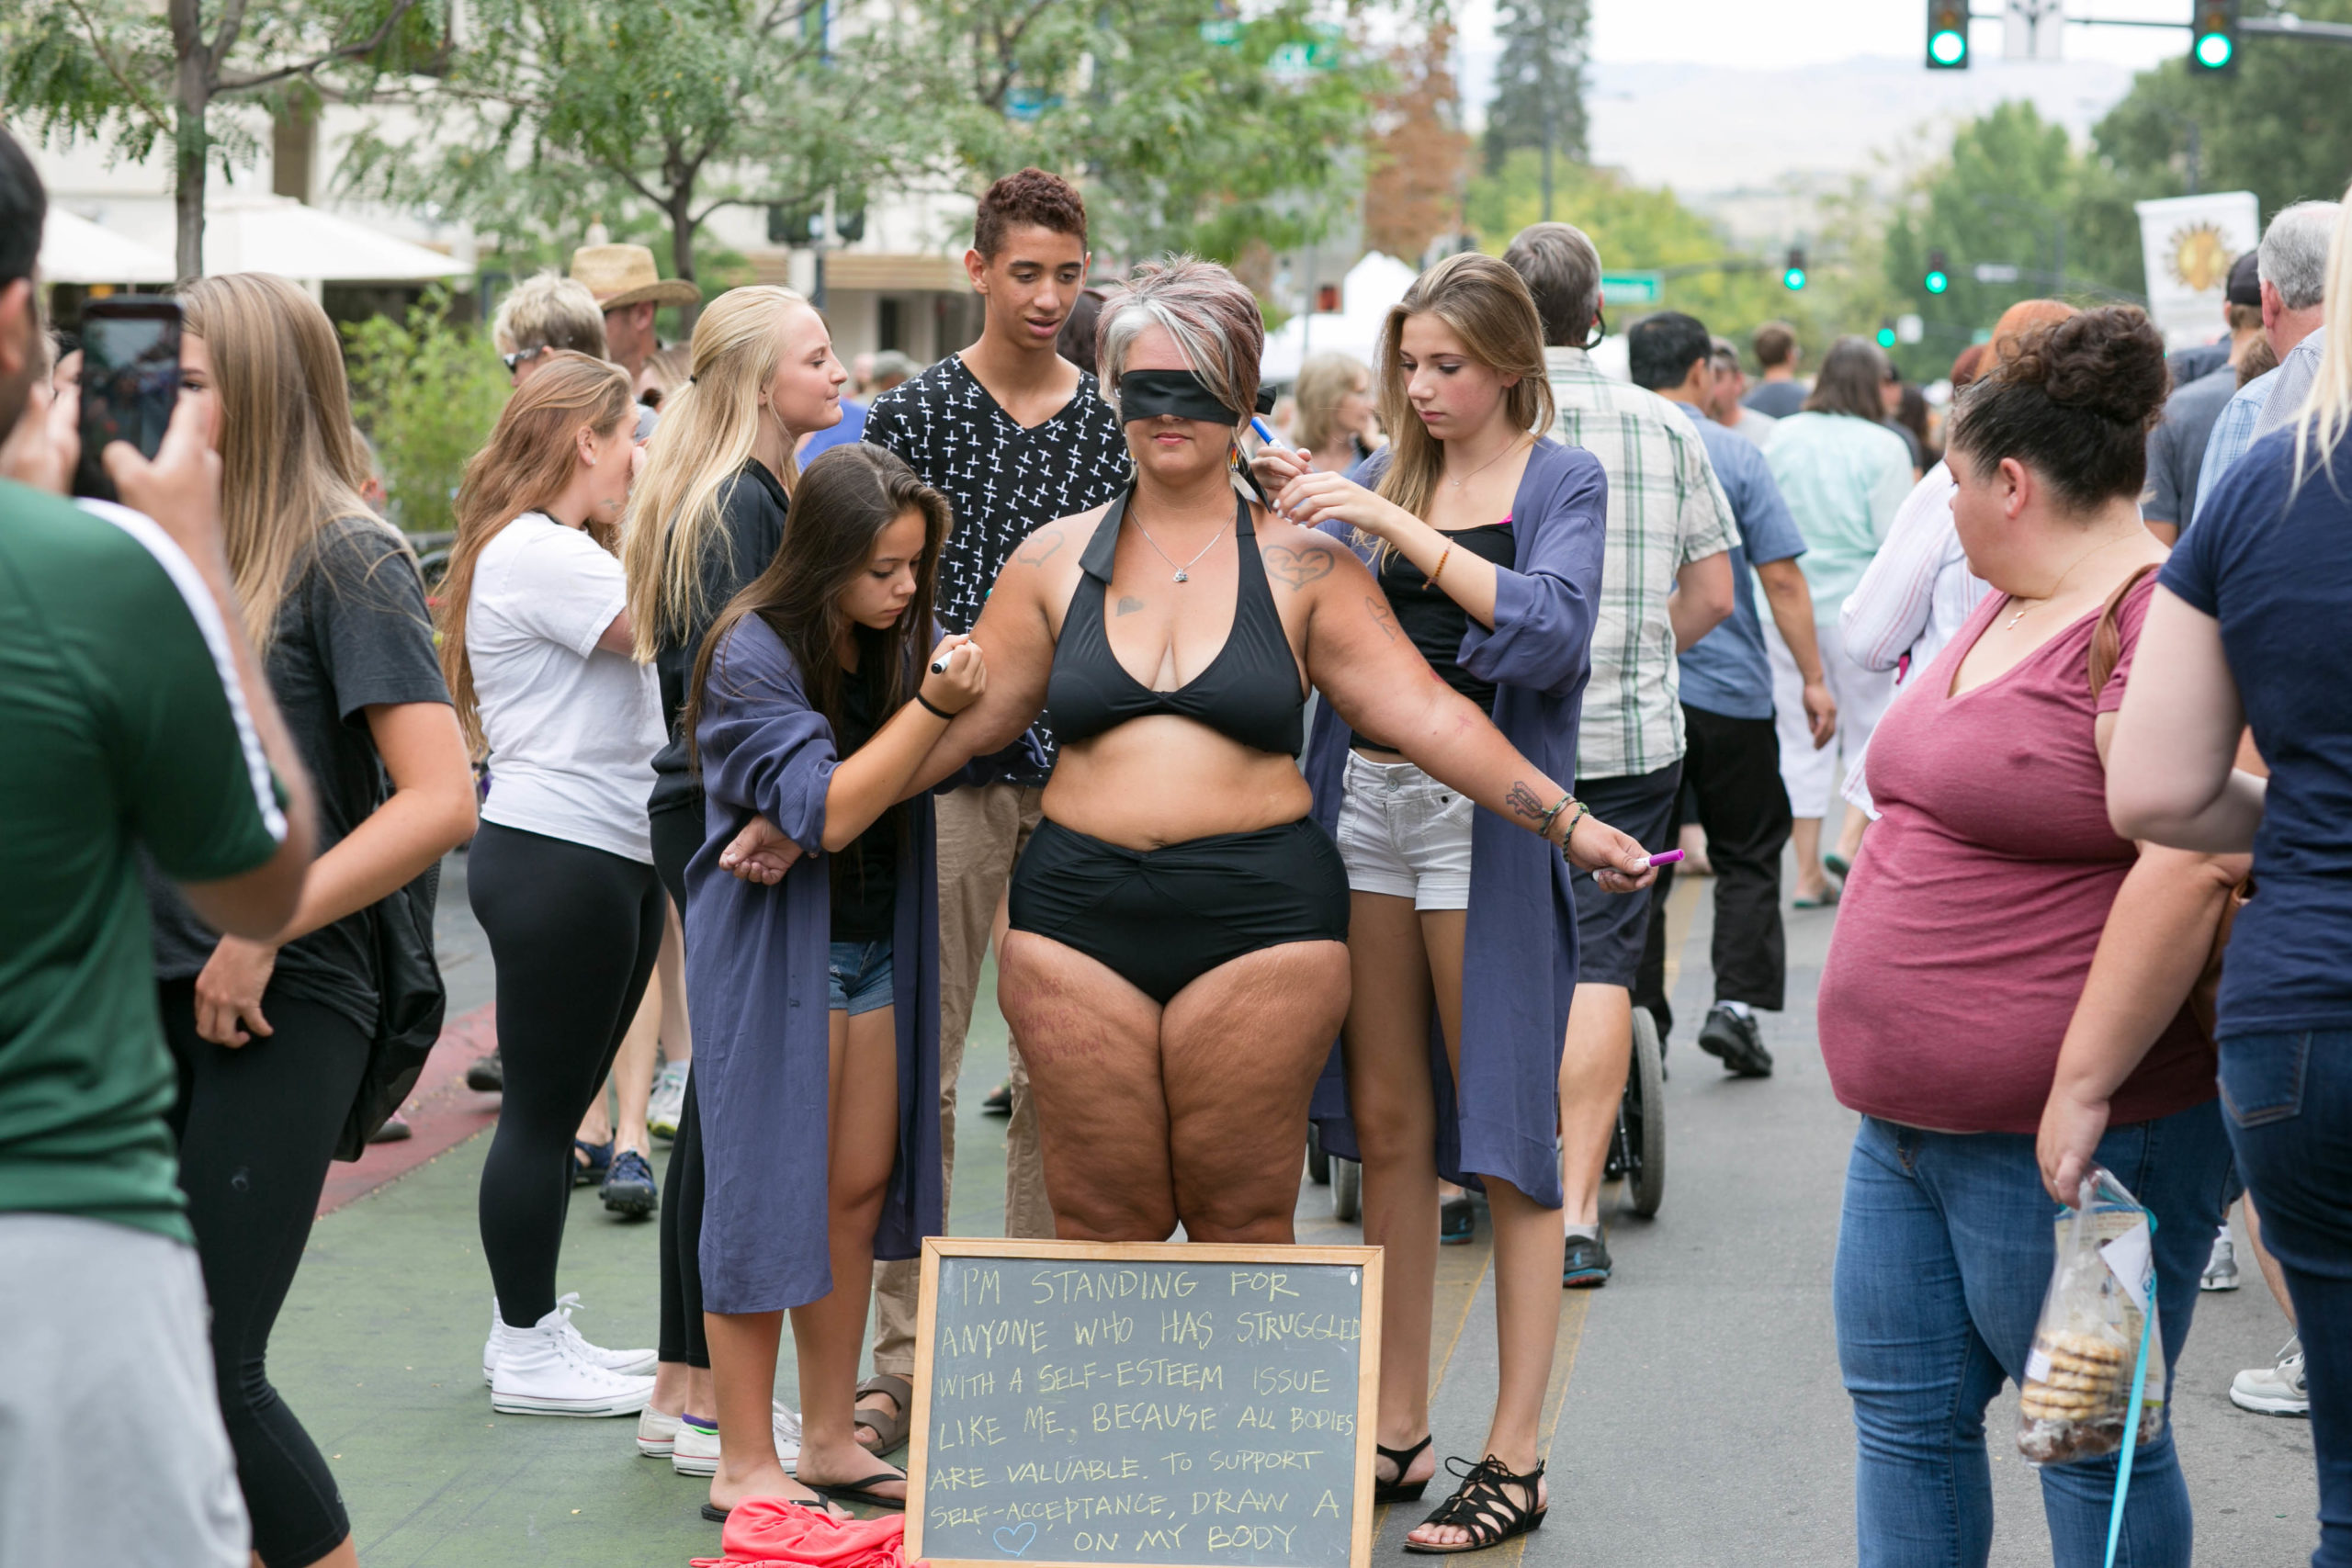 Tommie's Body Positive Message Heard Around the World - Newsroom